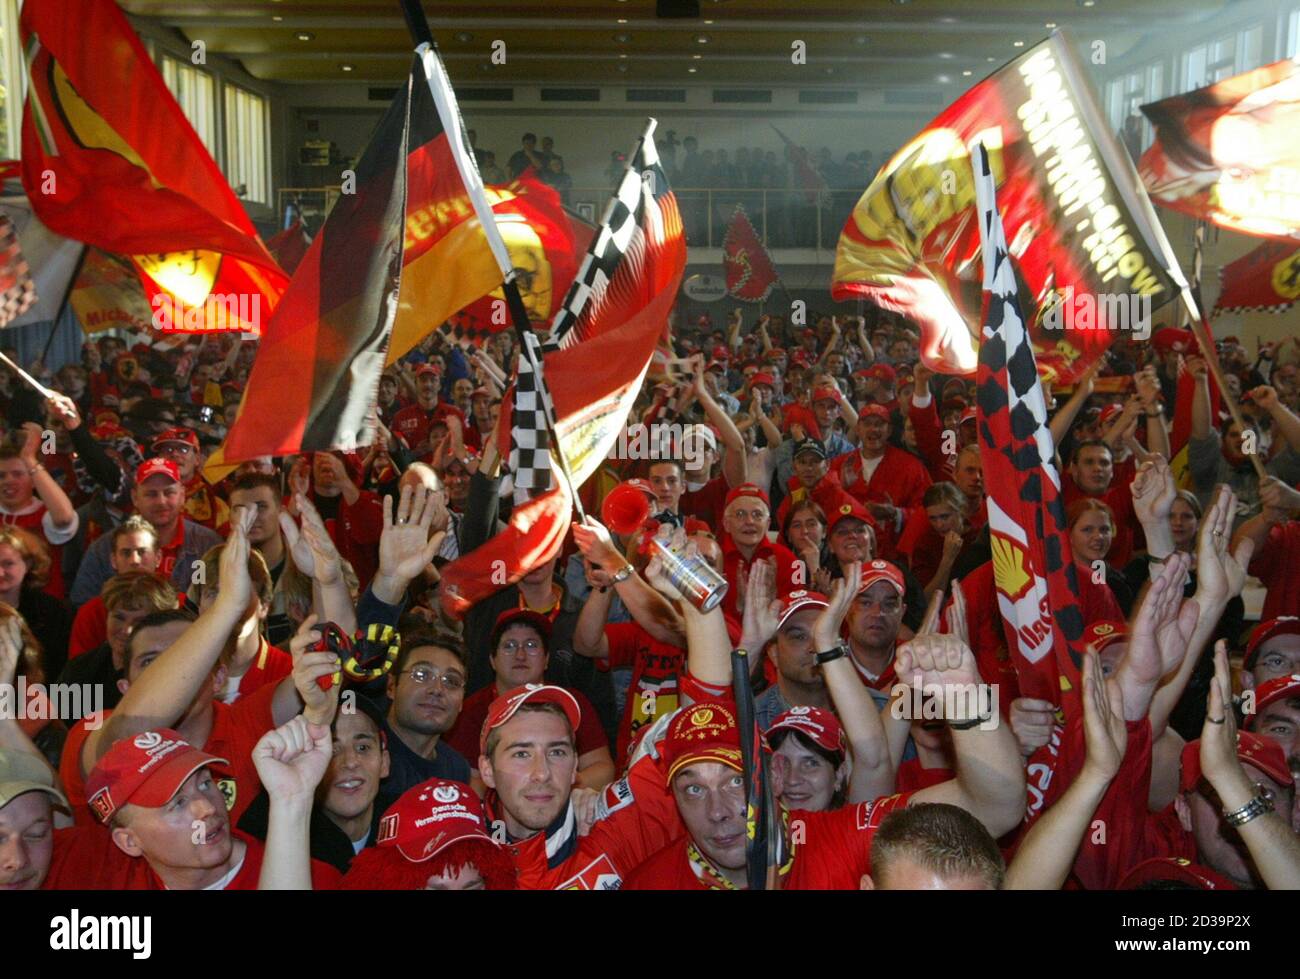 Supporters of German Formula One driver Michael Schumacher and the Ferrari team wave flags while watching the season-ending Formula One Japanese Grand Prix race in Suzuka, central Japan, on a large viedeo screen in Schumacher's western German hometown of Kerpen near Cologne October 12, 2003. Schumacher won the World Championships title a record sixth time after placing 8th in Suzuka. REUTERS/Wolfgang Rattay  WR/AA Stock Photo